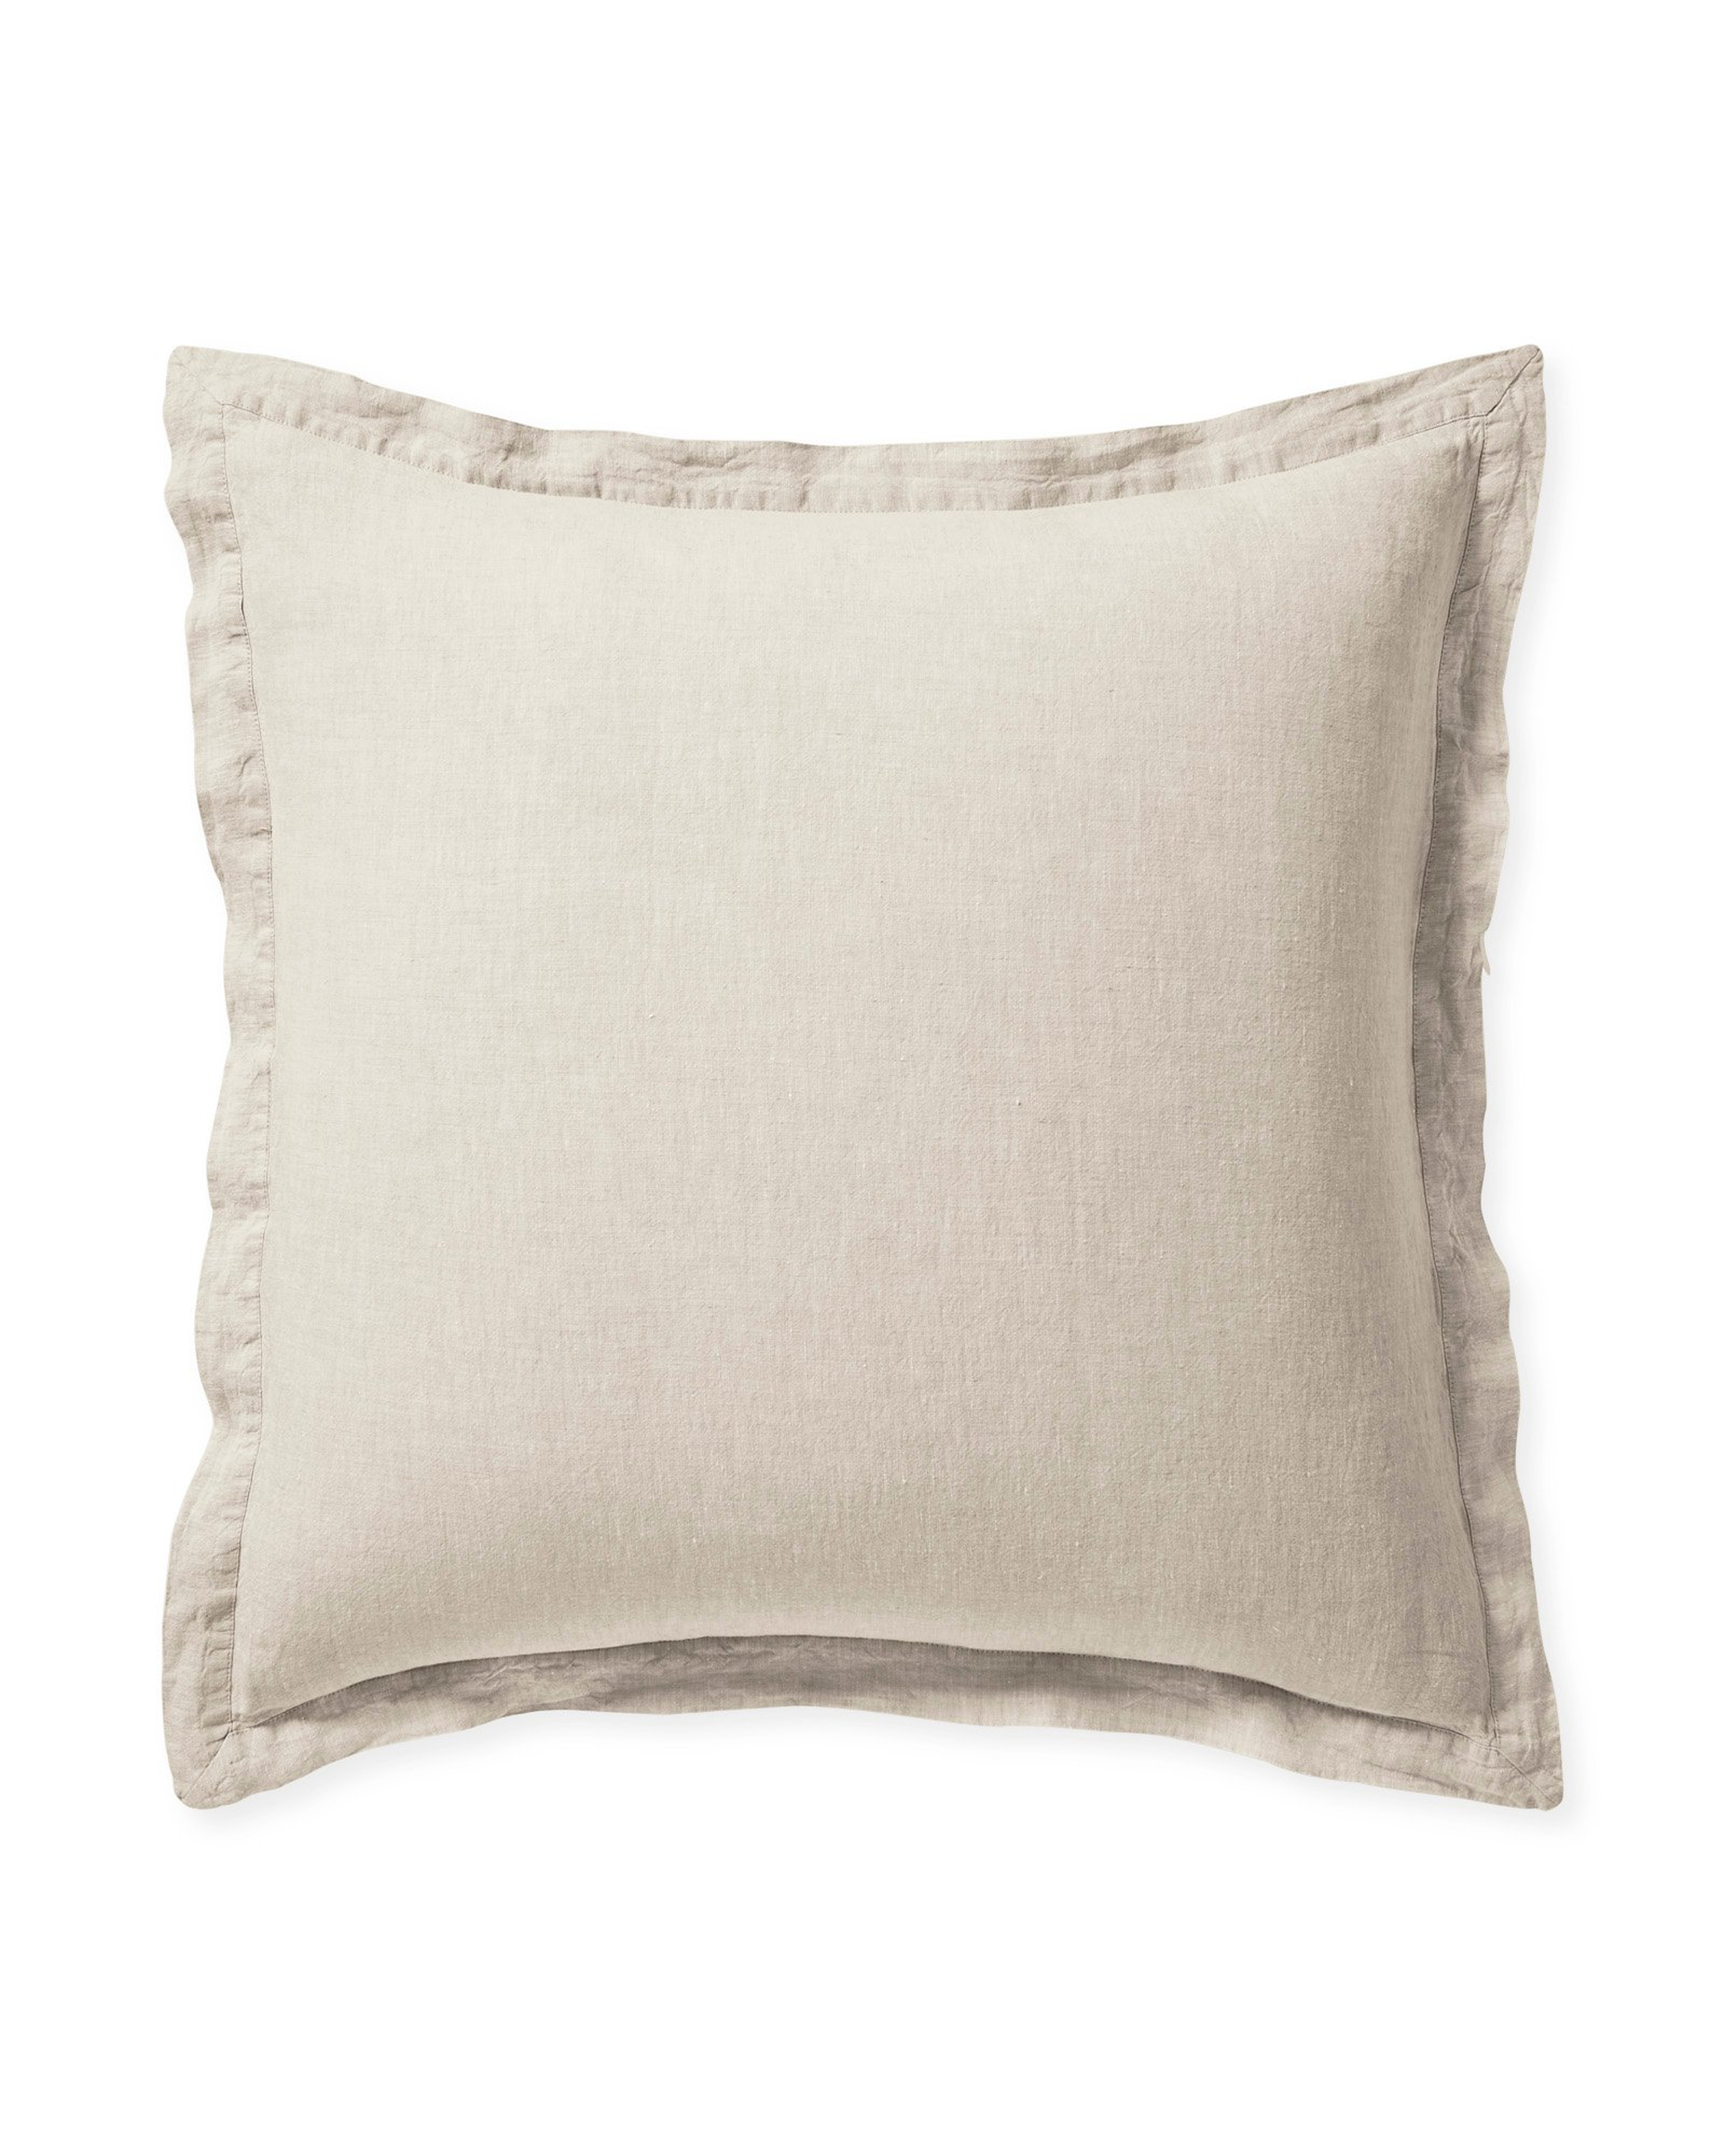 Cavallo Linen Euro Sham - Heathered Flax - Insert sold separately - Serena and Lily